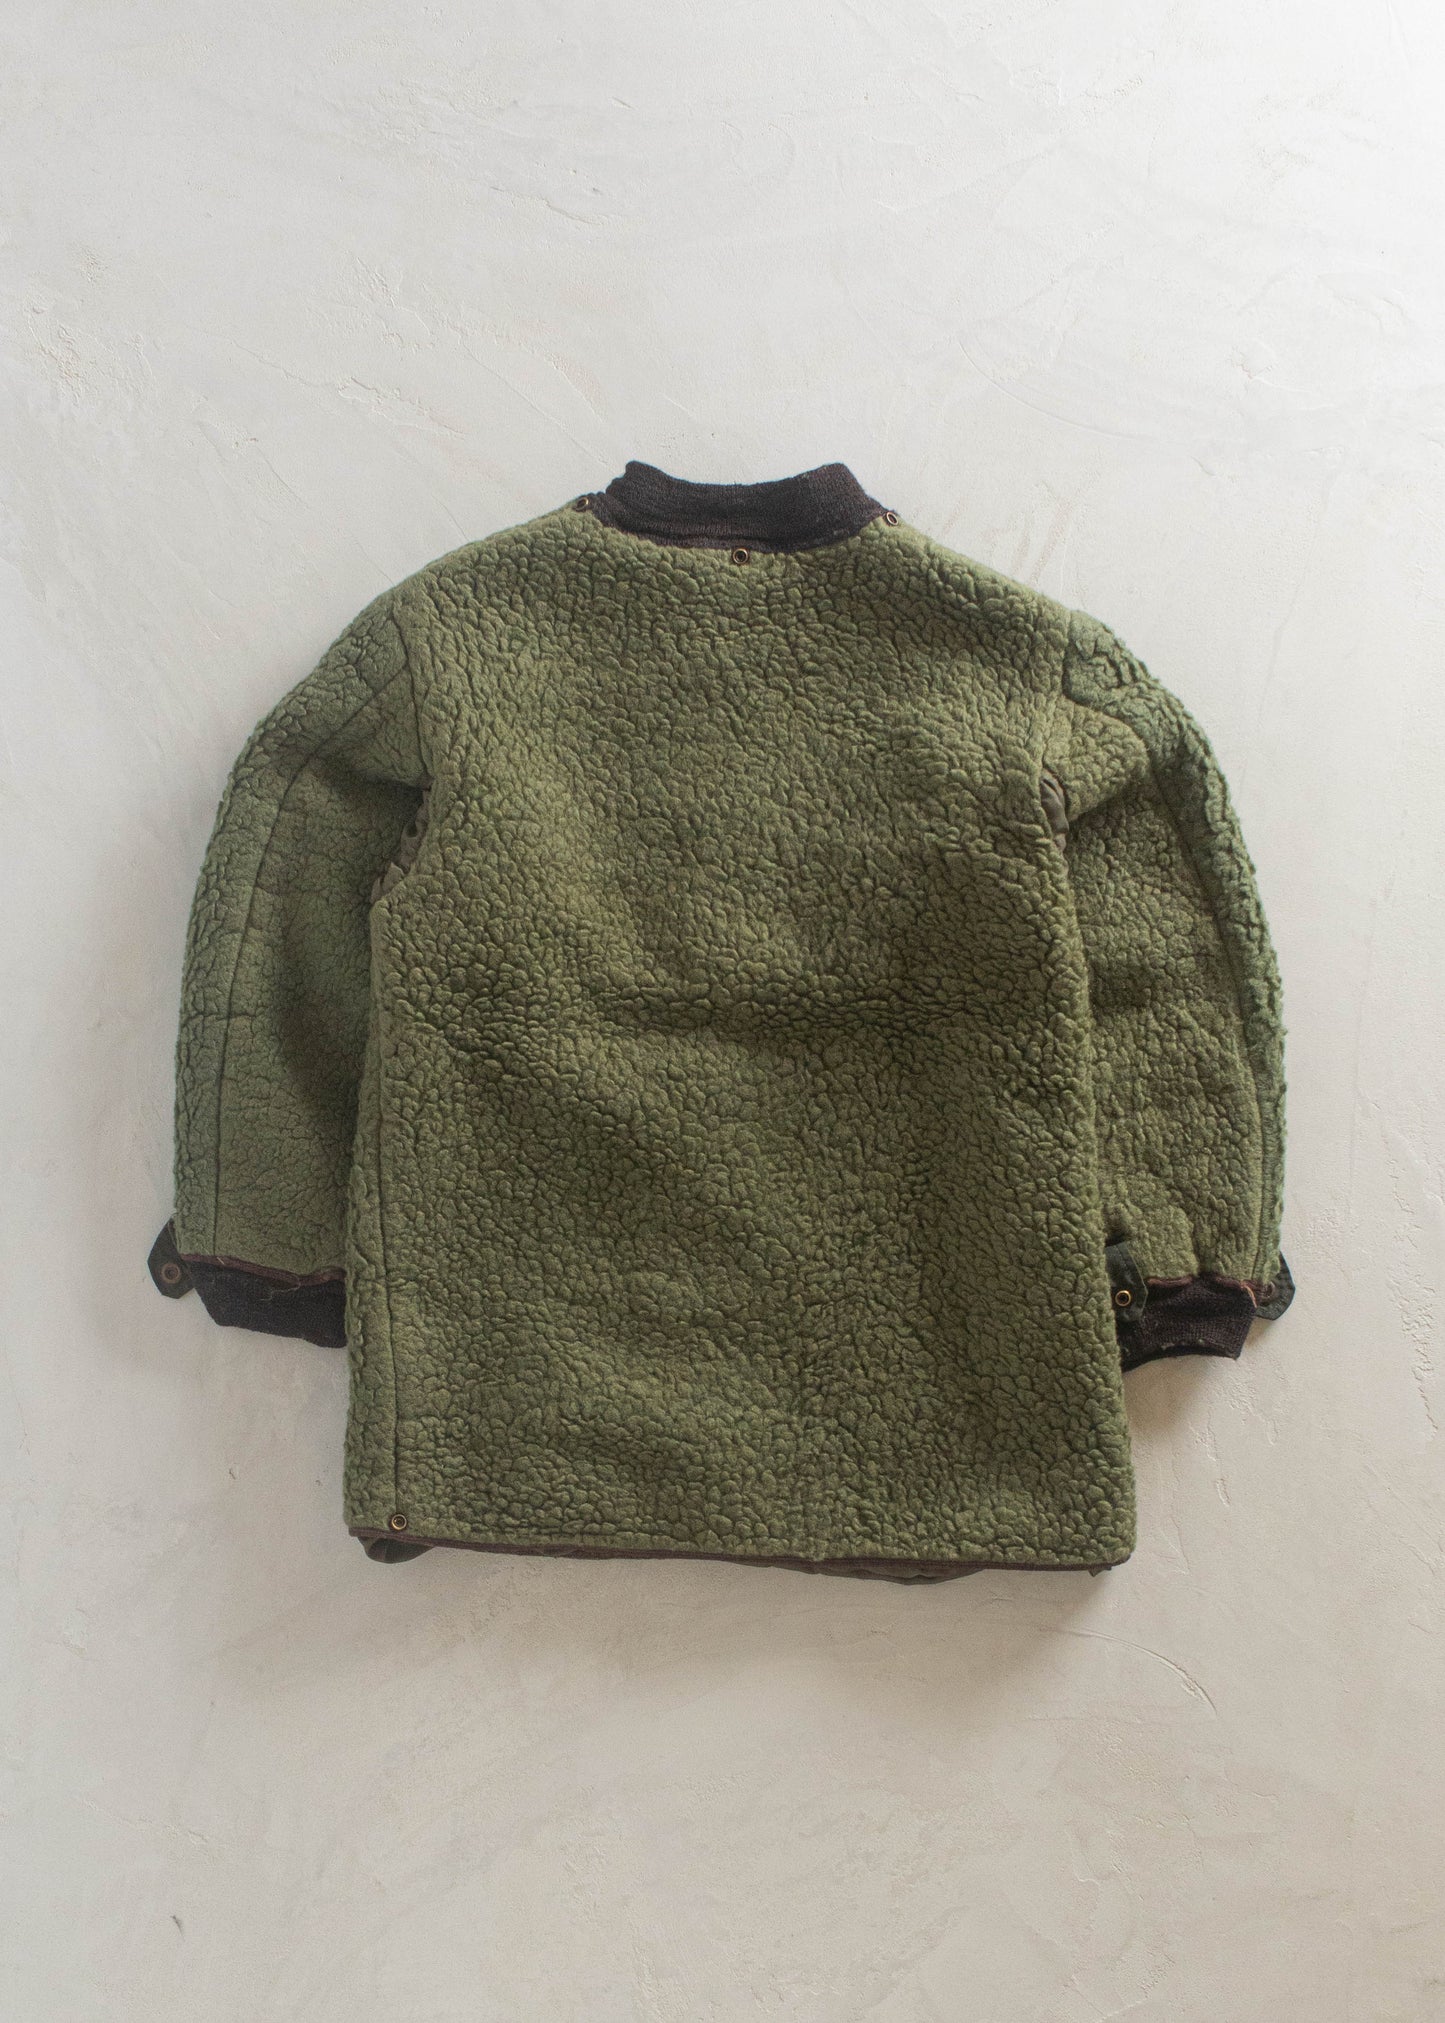 1980s Military Teddy Liner Jacket Size XS/S